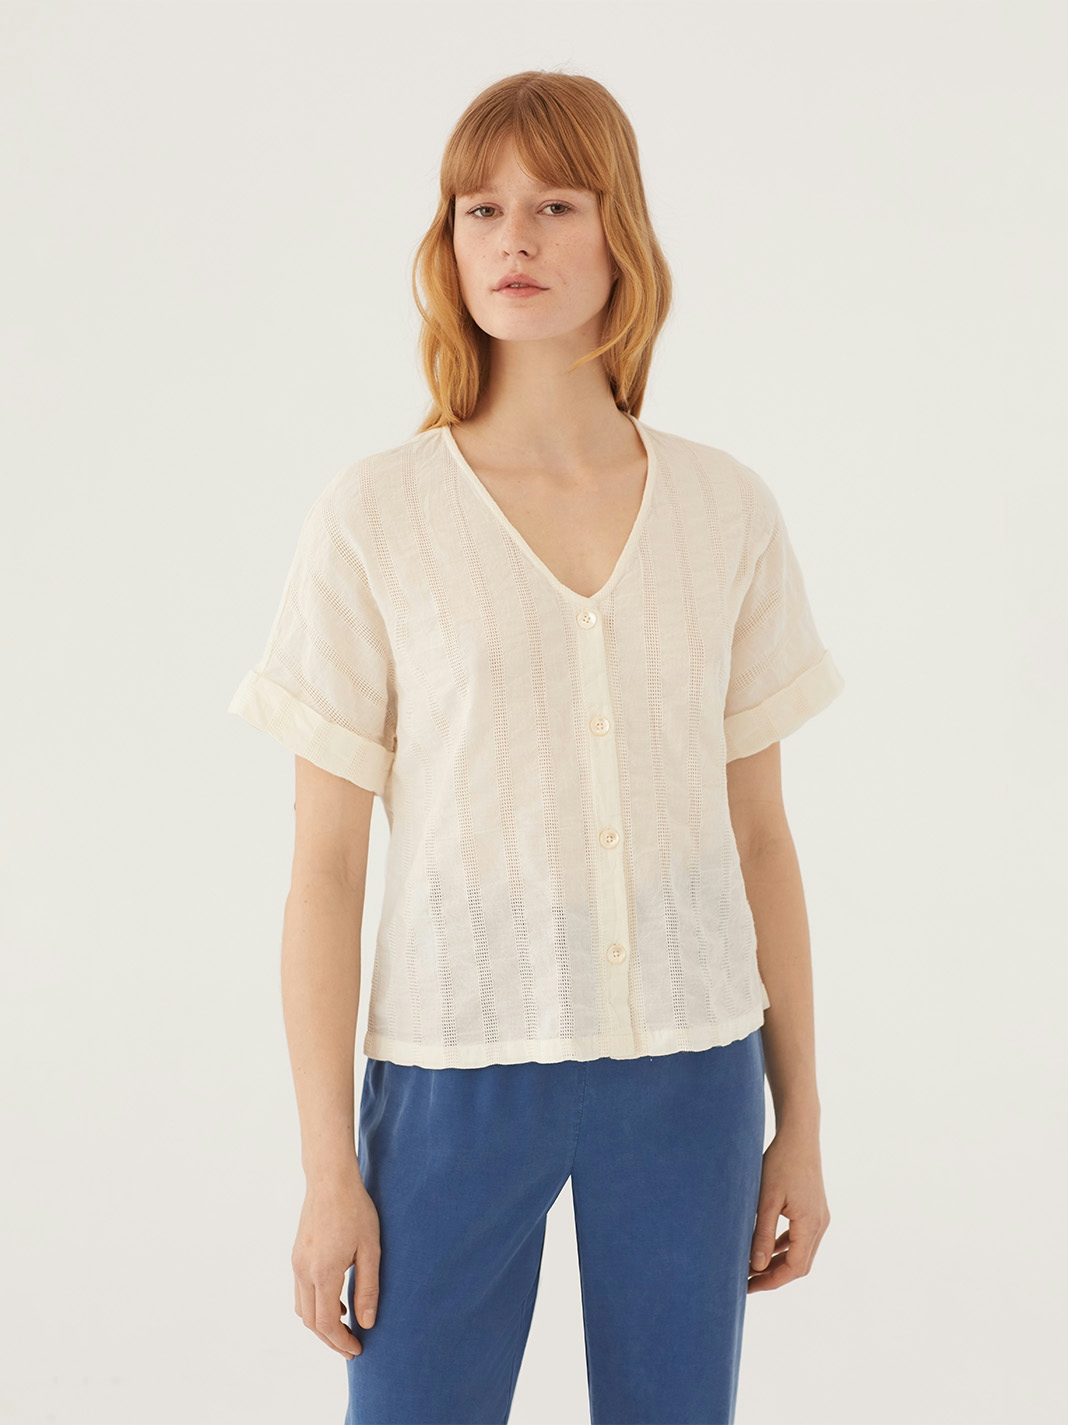 Knitted hemstitch top